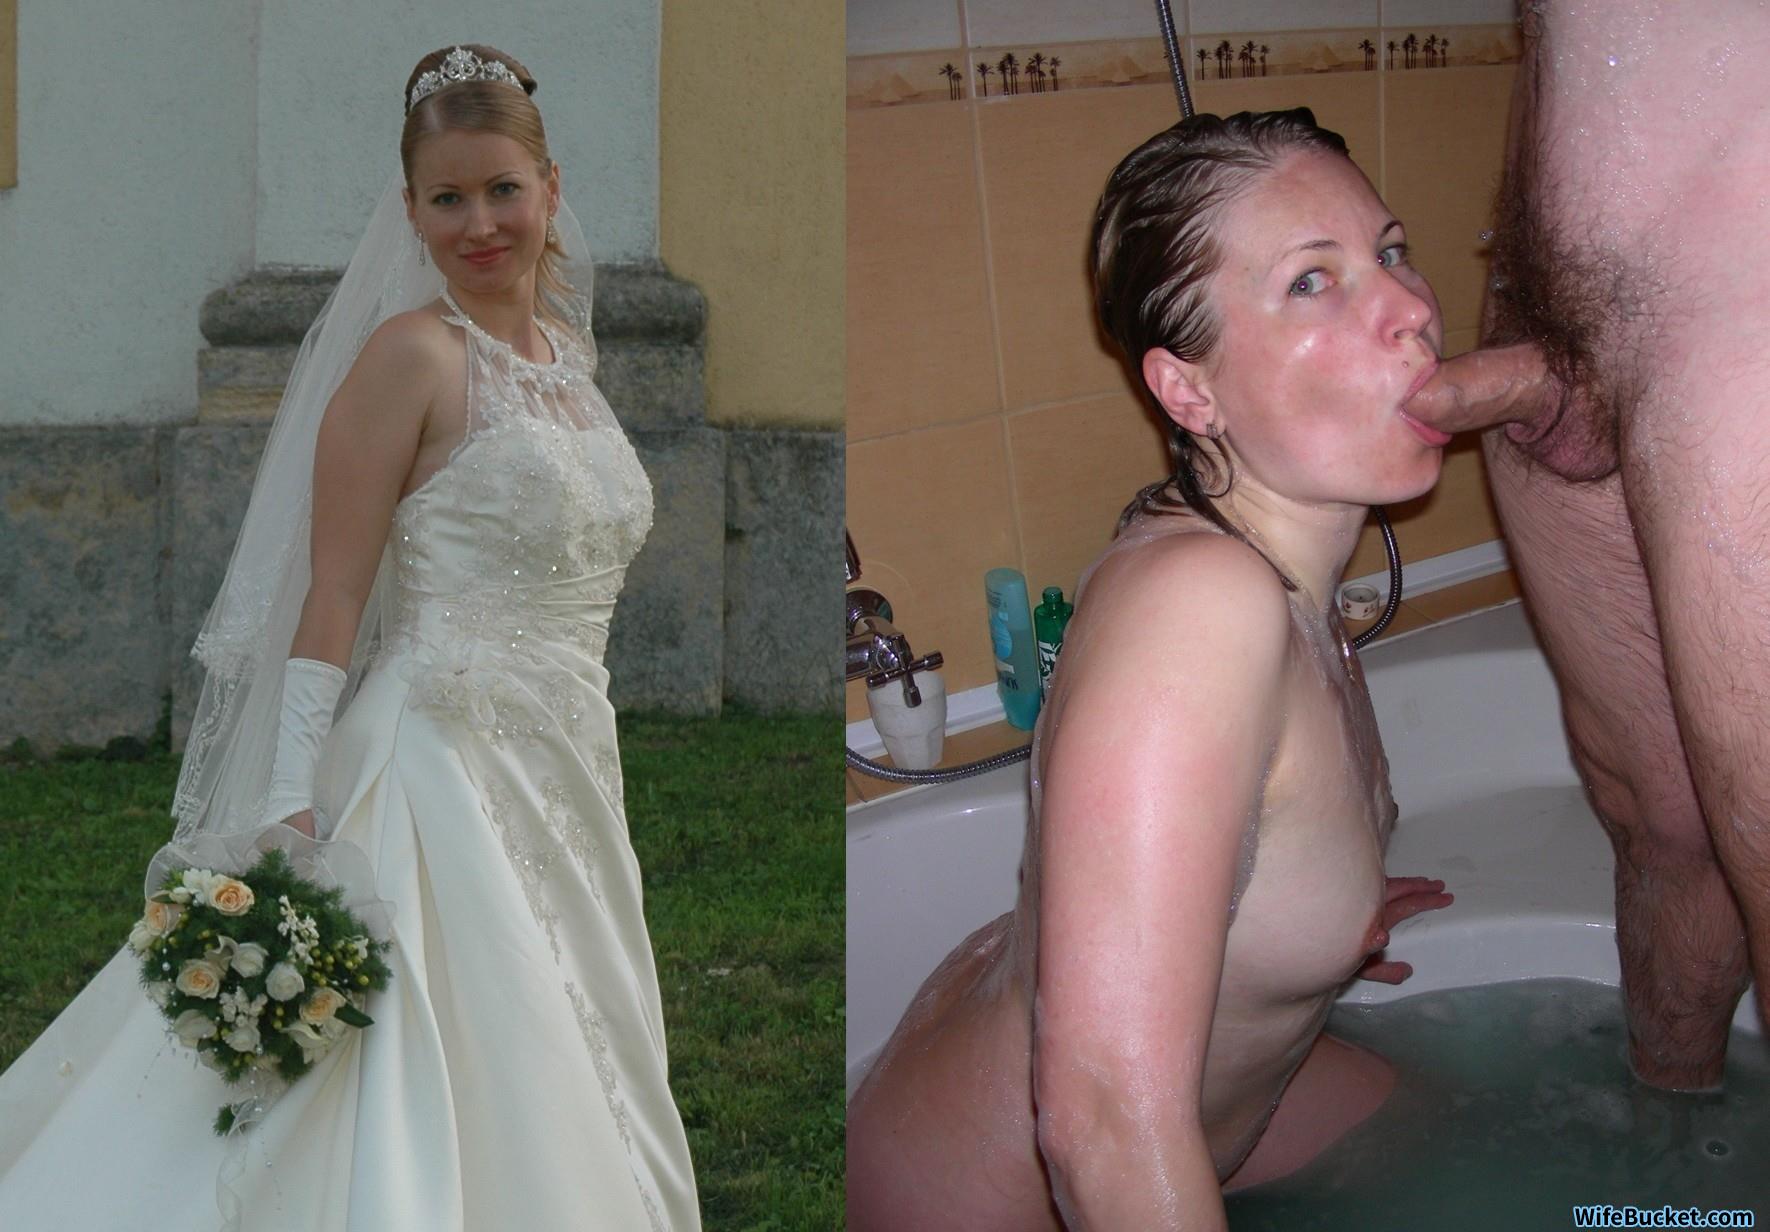 Fat Bride Pussy - Before-after sex pics â€“ WifeBucket | Offical MILF Blog